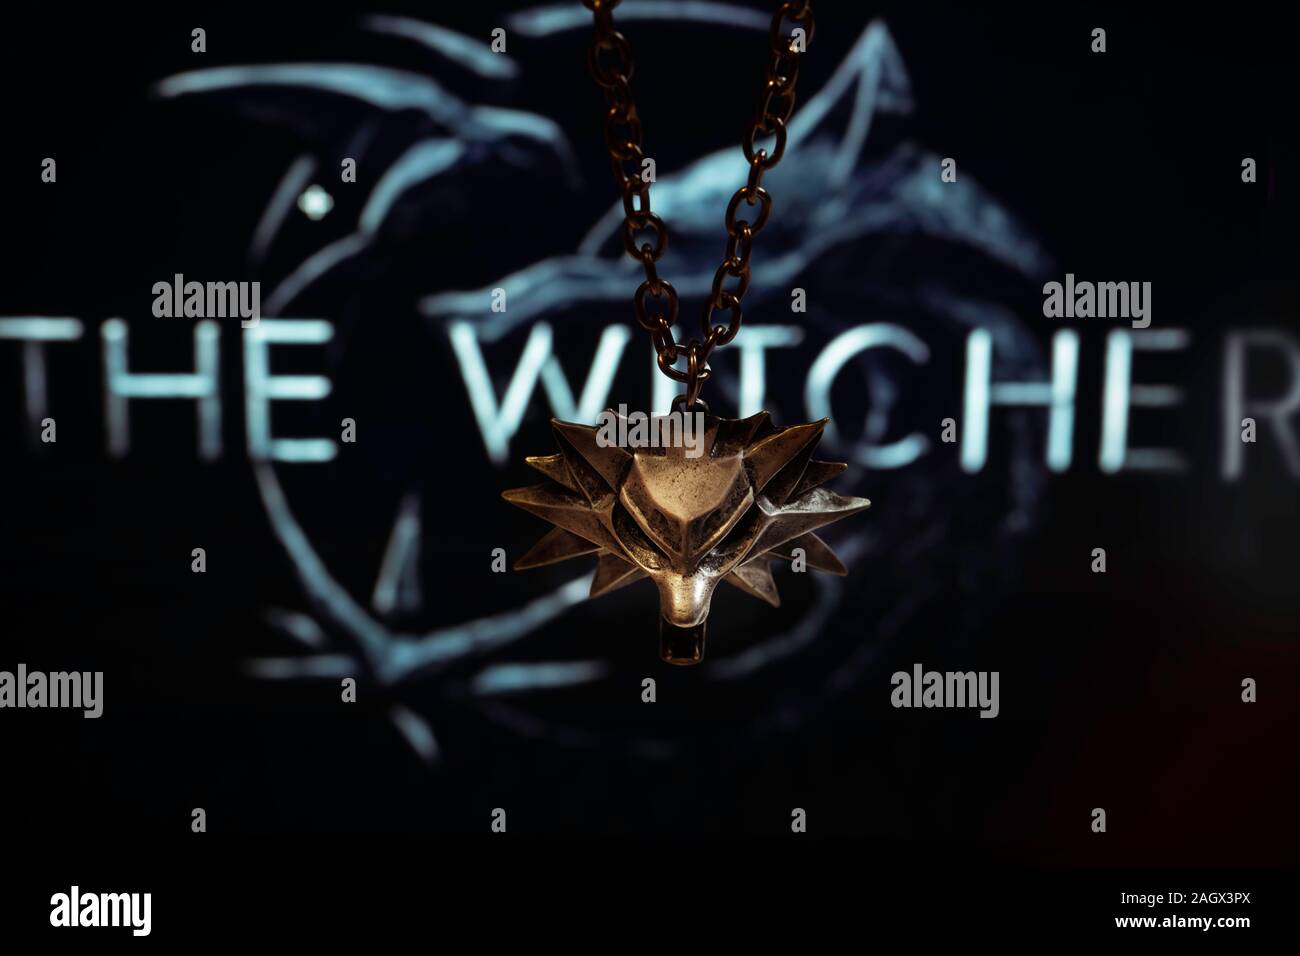 NIZHYN,UKRAINE/21 December 2019: Witcher's medallion in shape of wolf with new Netflix premiere - TV series 'The Witcher' on the background Stock Photo